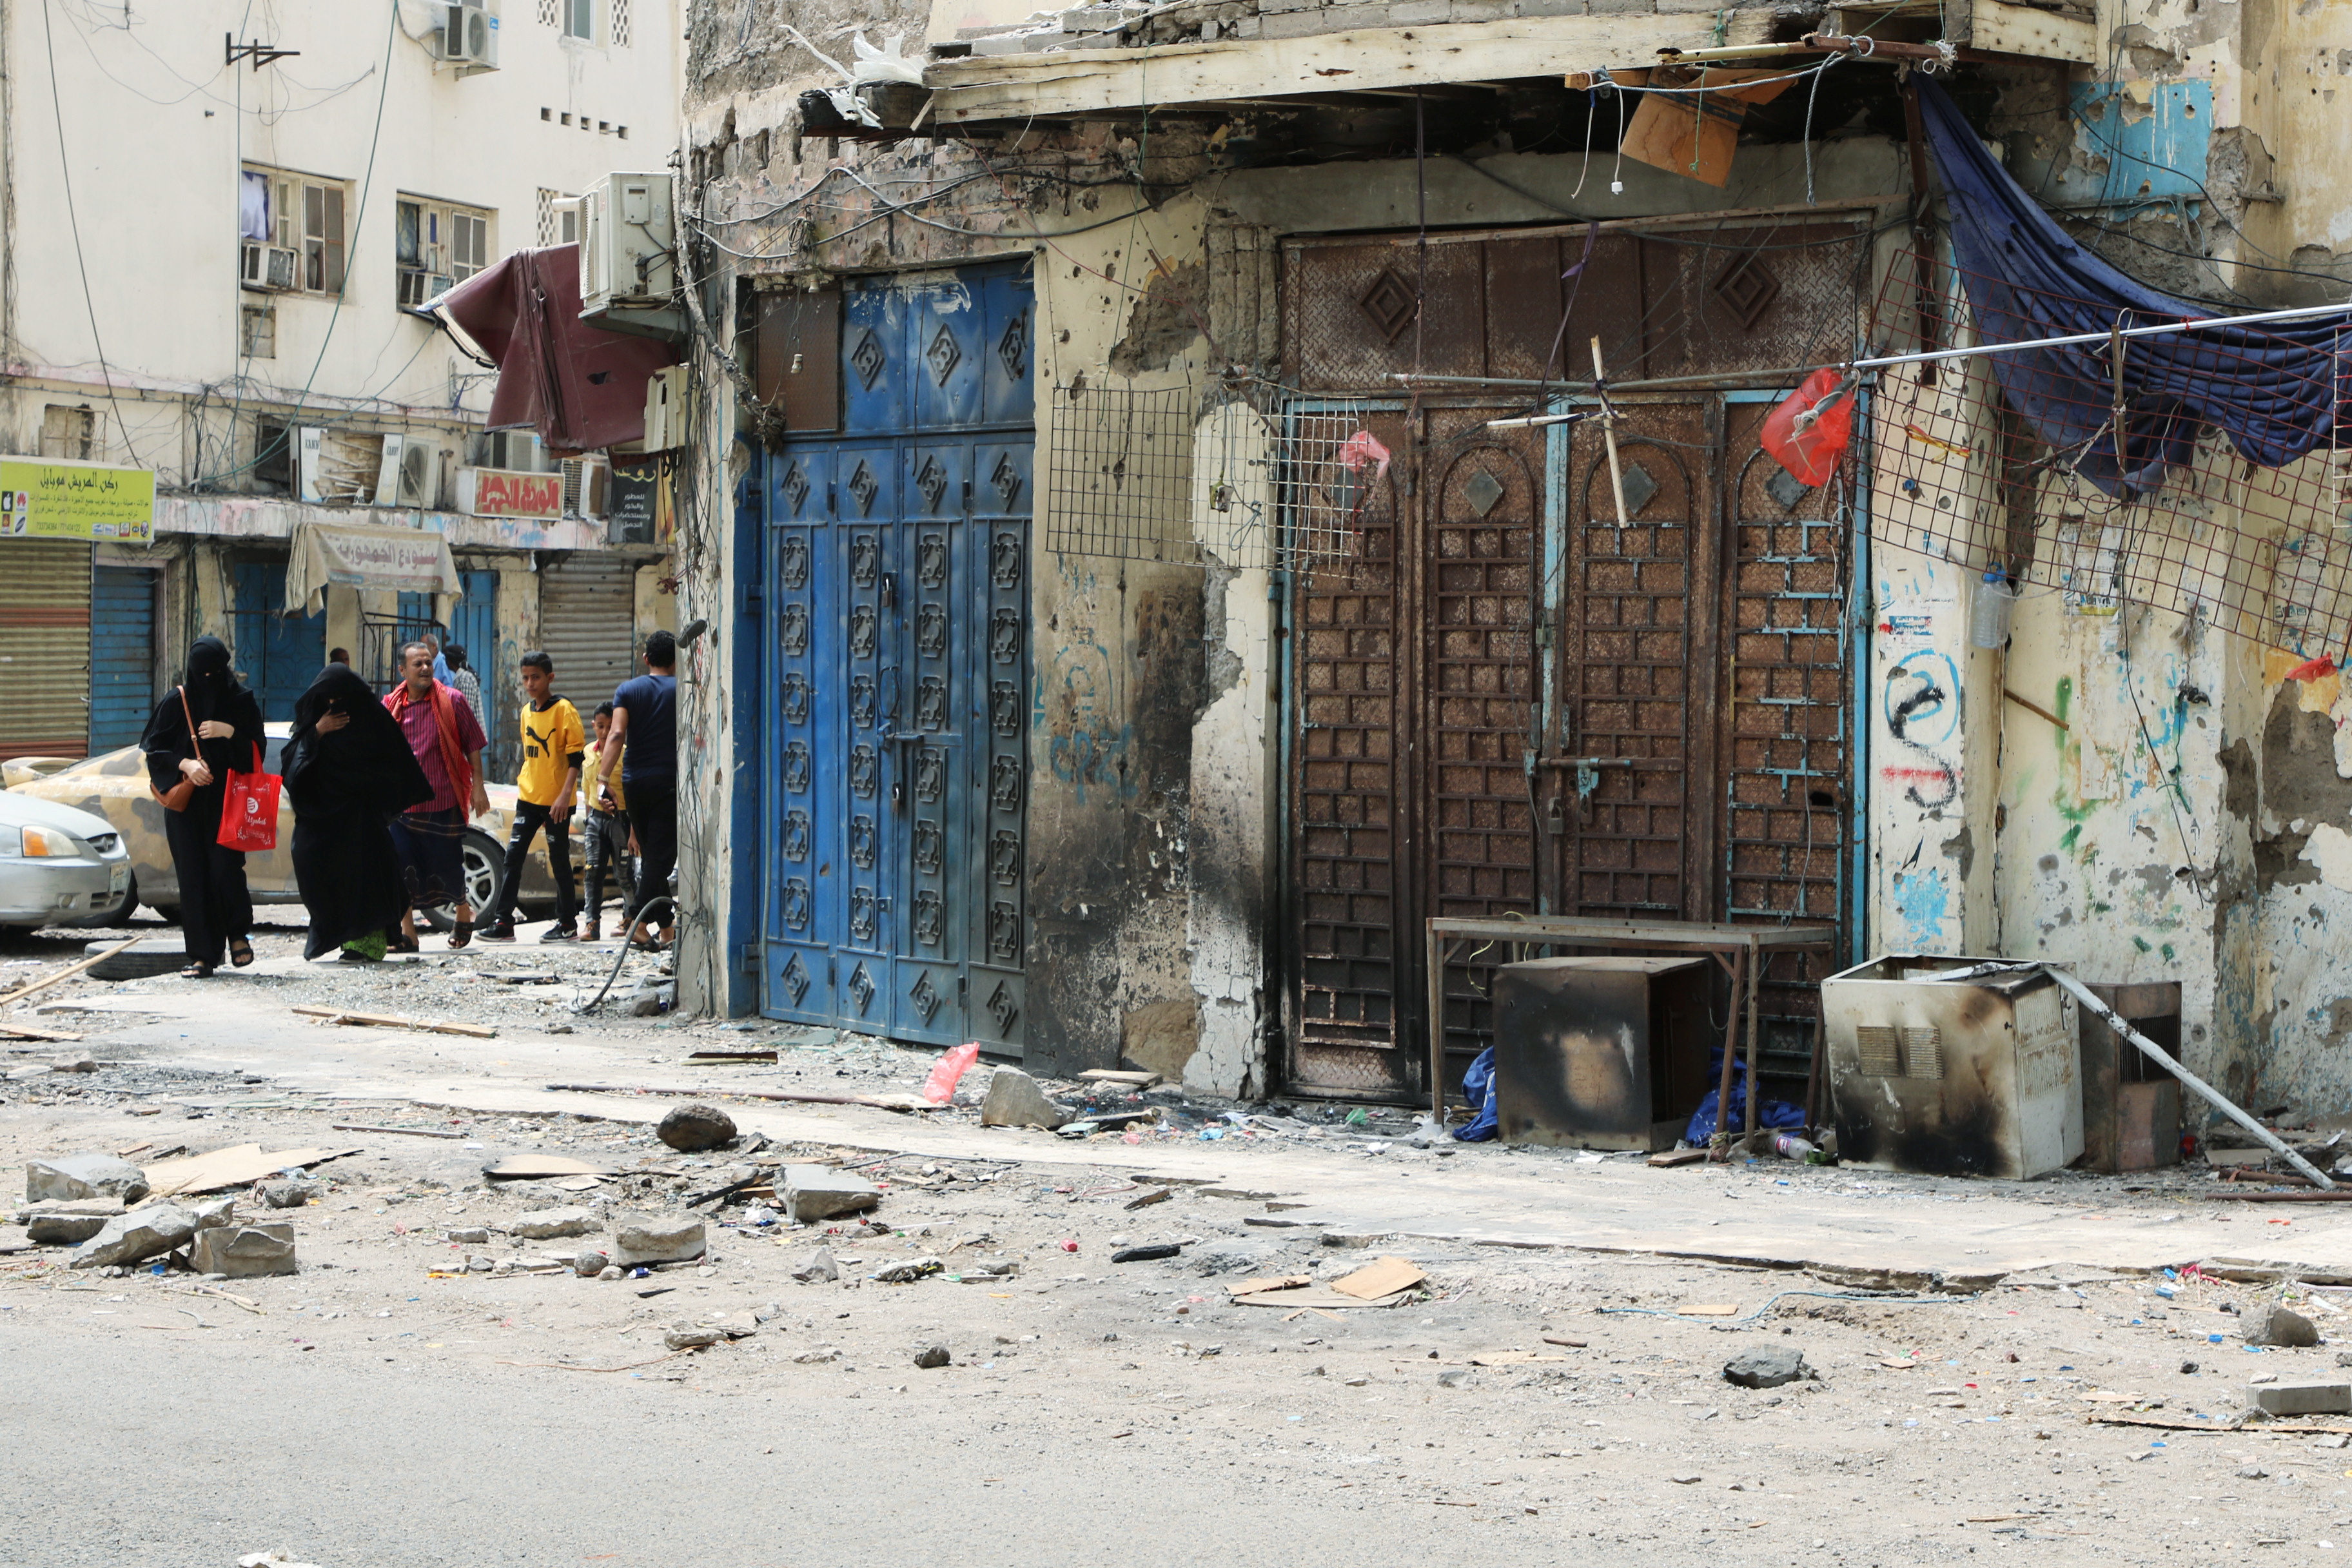 Yemenis walk past shops damaged during clashes in Aden (Reuters)